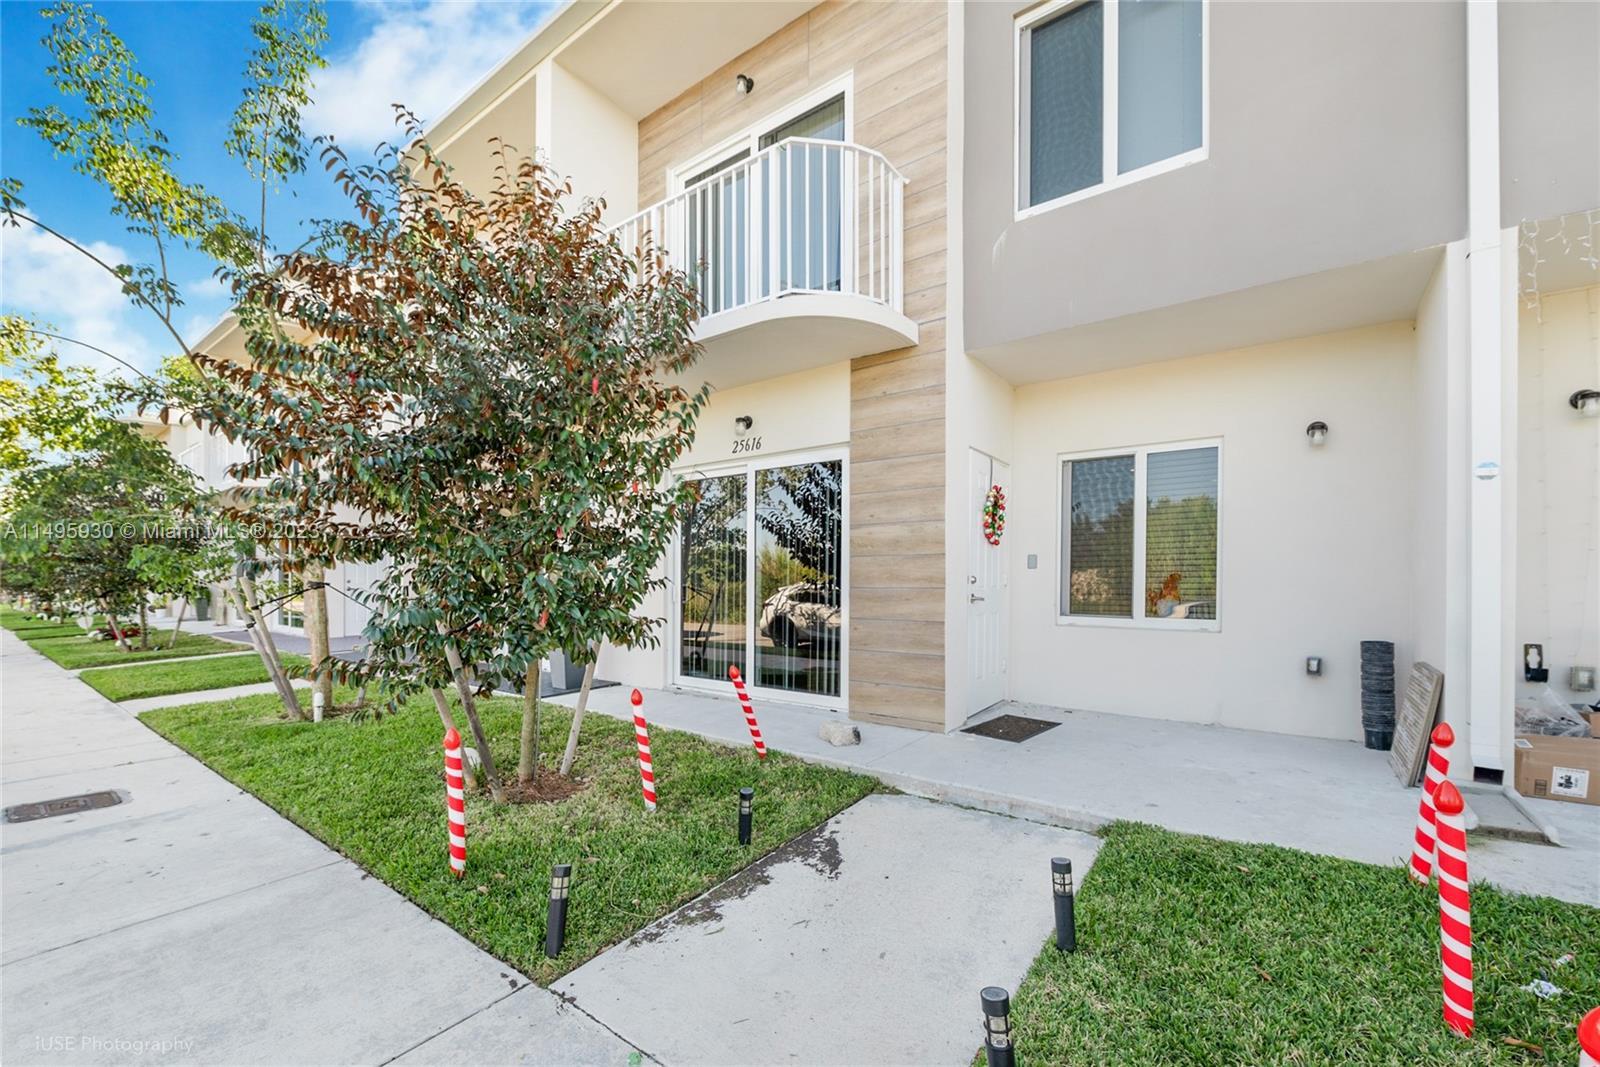 Photo of 25616 SW 143rd Path #25616 in Homestead, FL